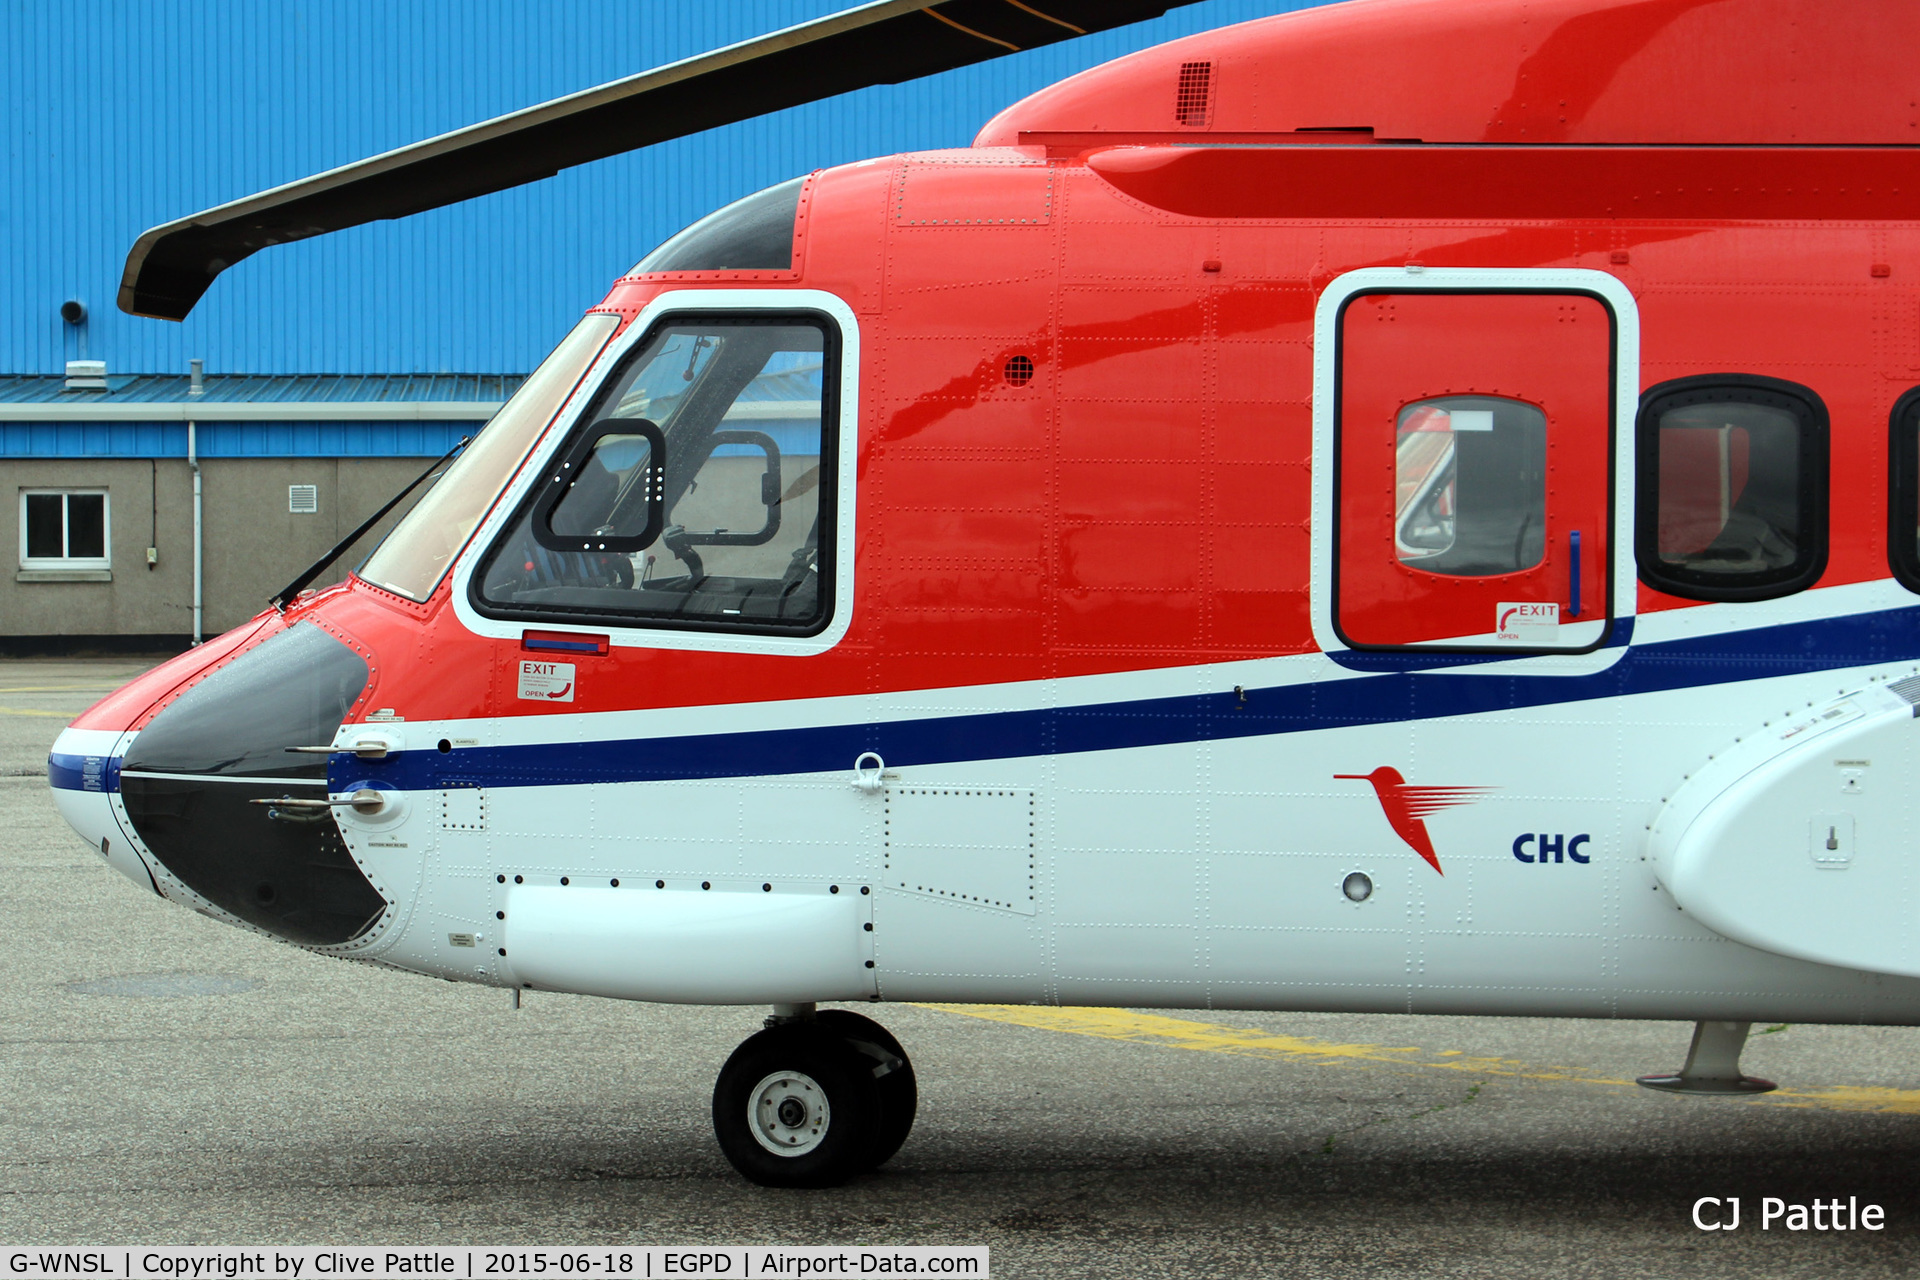 G-WNSL, 2014 Sikorsky S-92A C/N 920241, Nose detail whilst parked up at Aberdeen Airport, Scotland EGPD